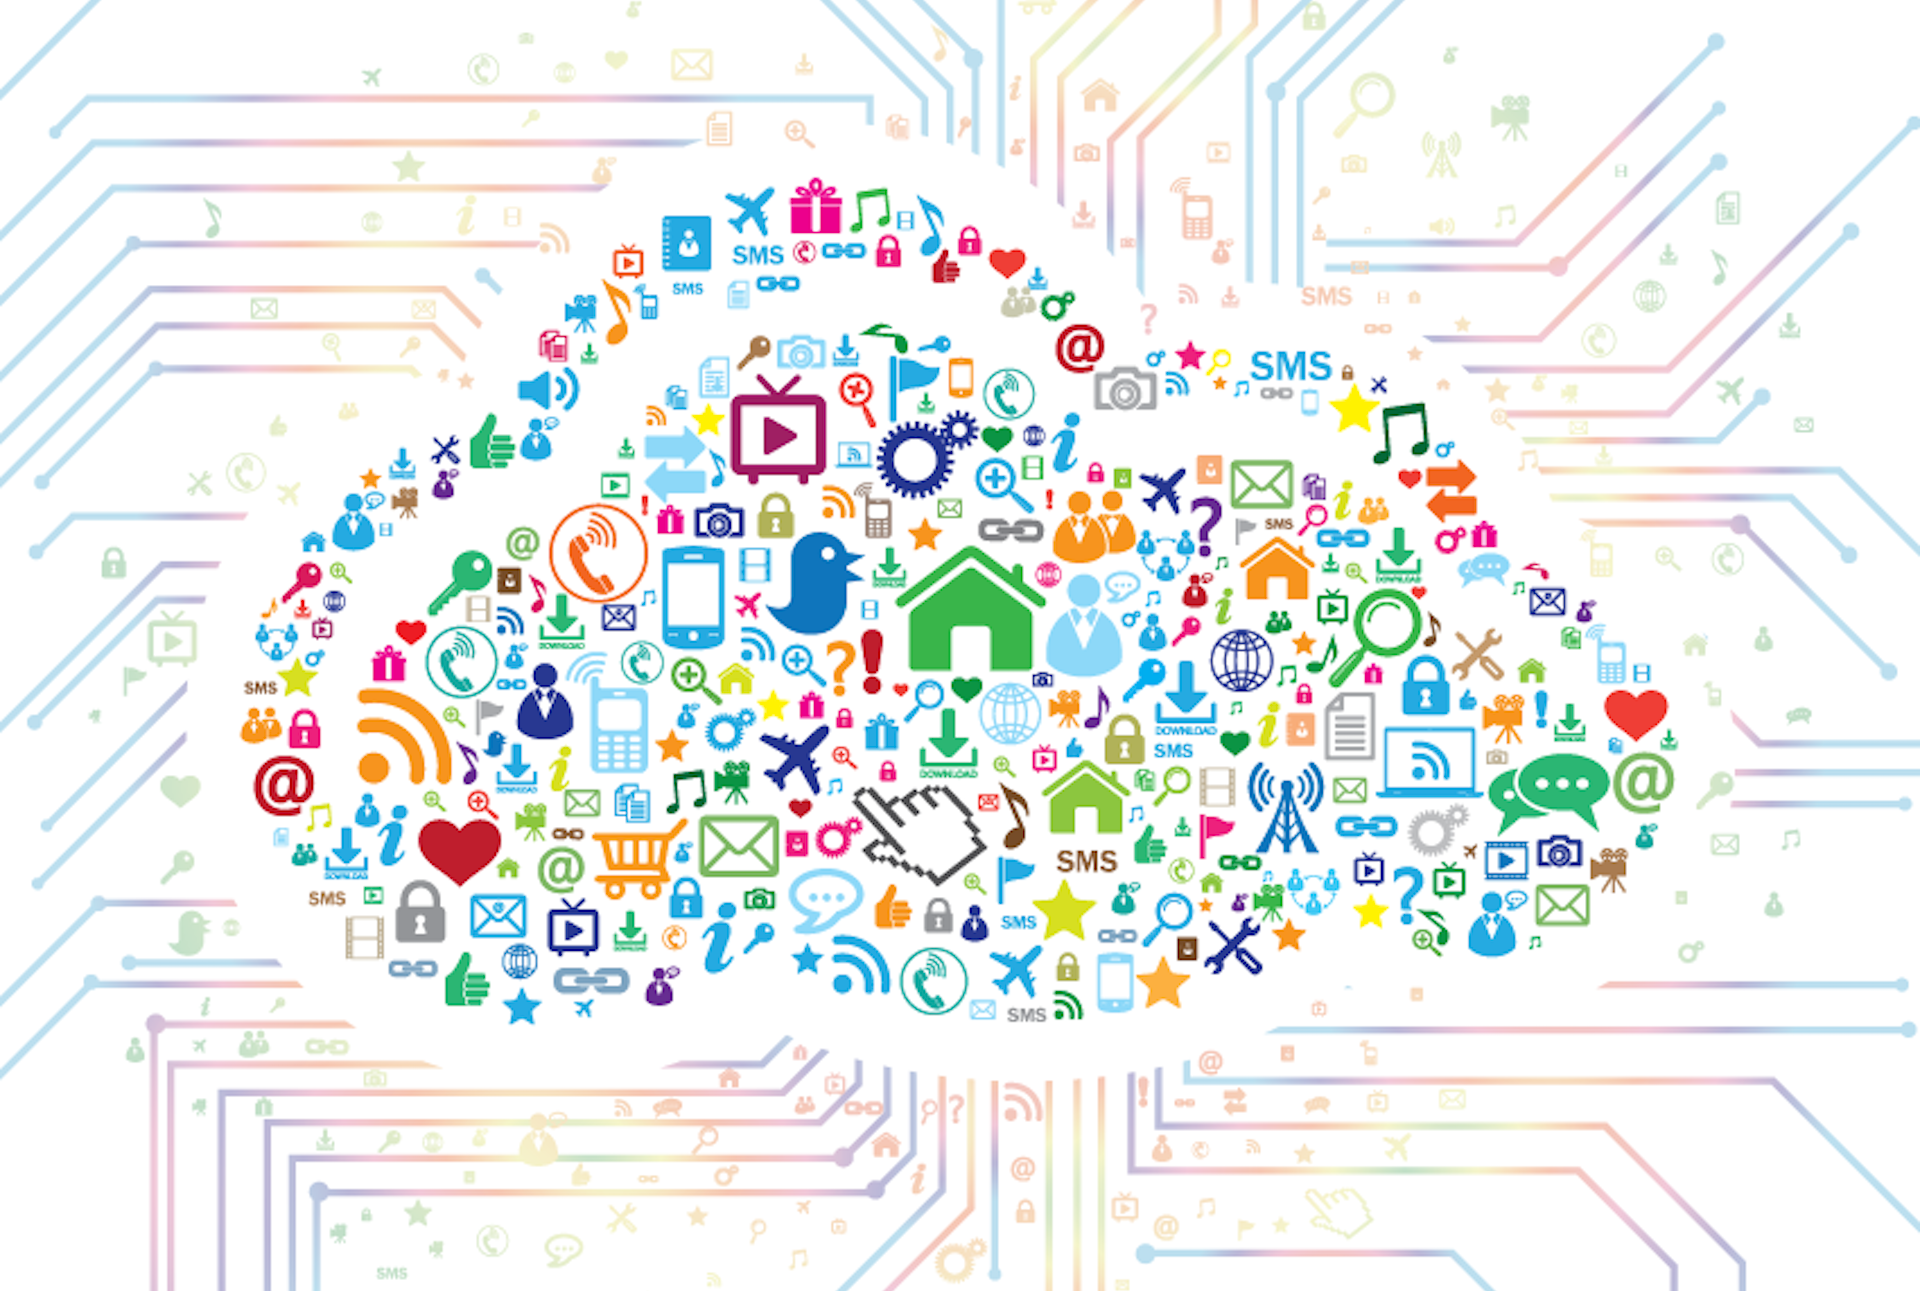 IoT and Big Data: Where’s the Action?